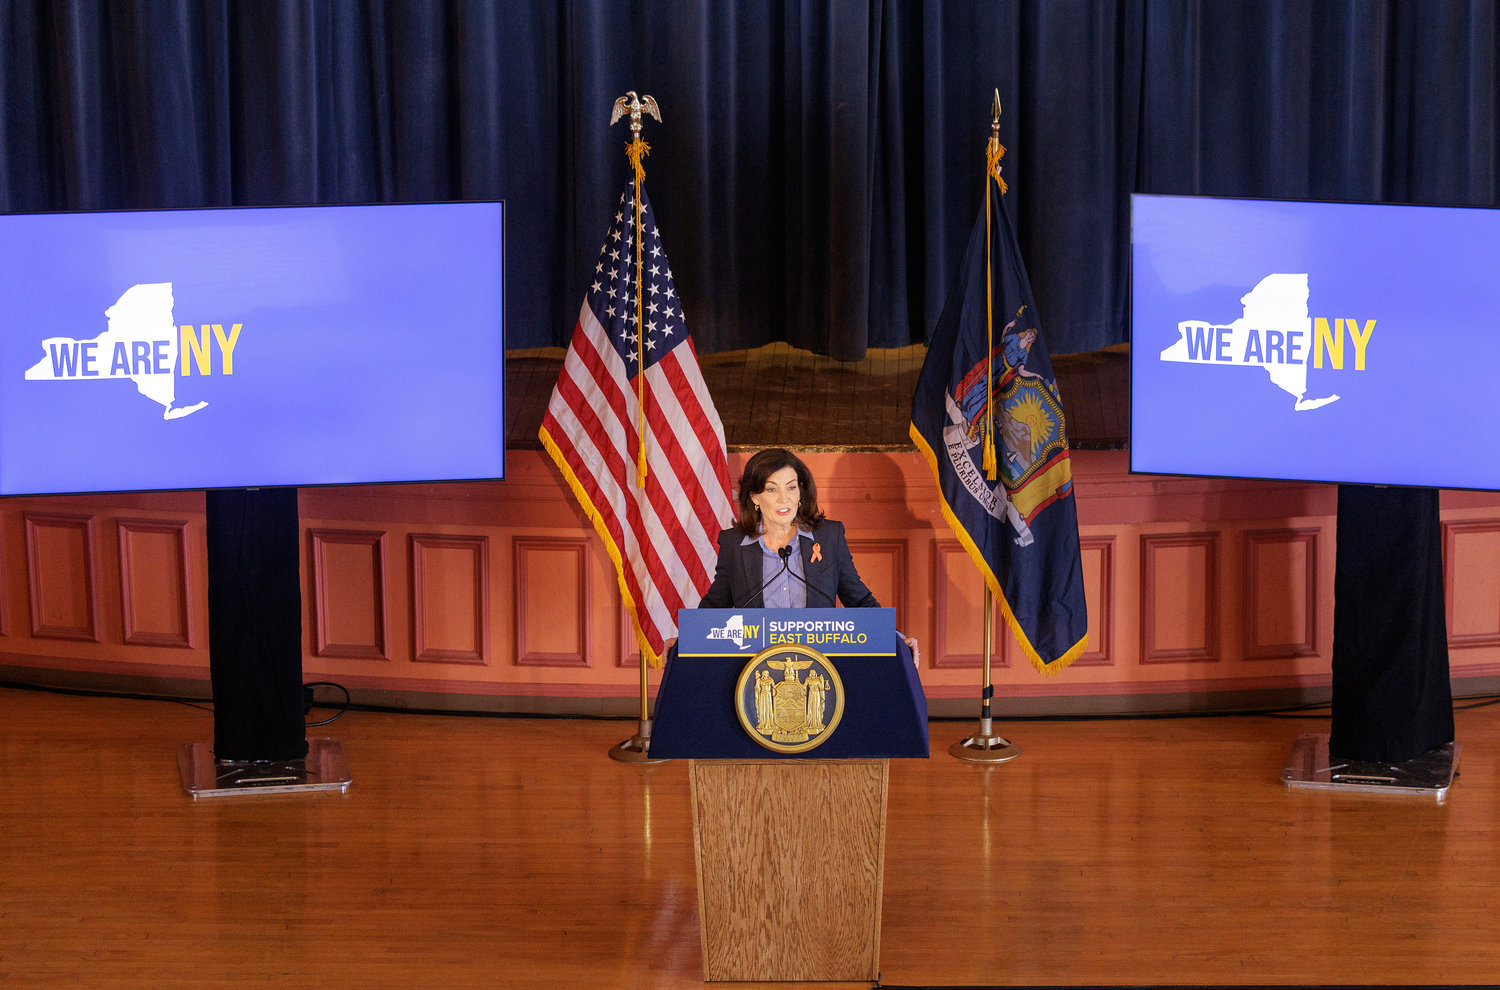 Although close, Gov. Kathy Hochul beat Lee Zeldin in order to hold onto the governor’s seat. In the northwest Bronx. Hochul took home the vast majority of the votes, becoming the first woman to be elected governor. She was appointed governor after former Gov. Andrew Cuomo left office last year.